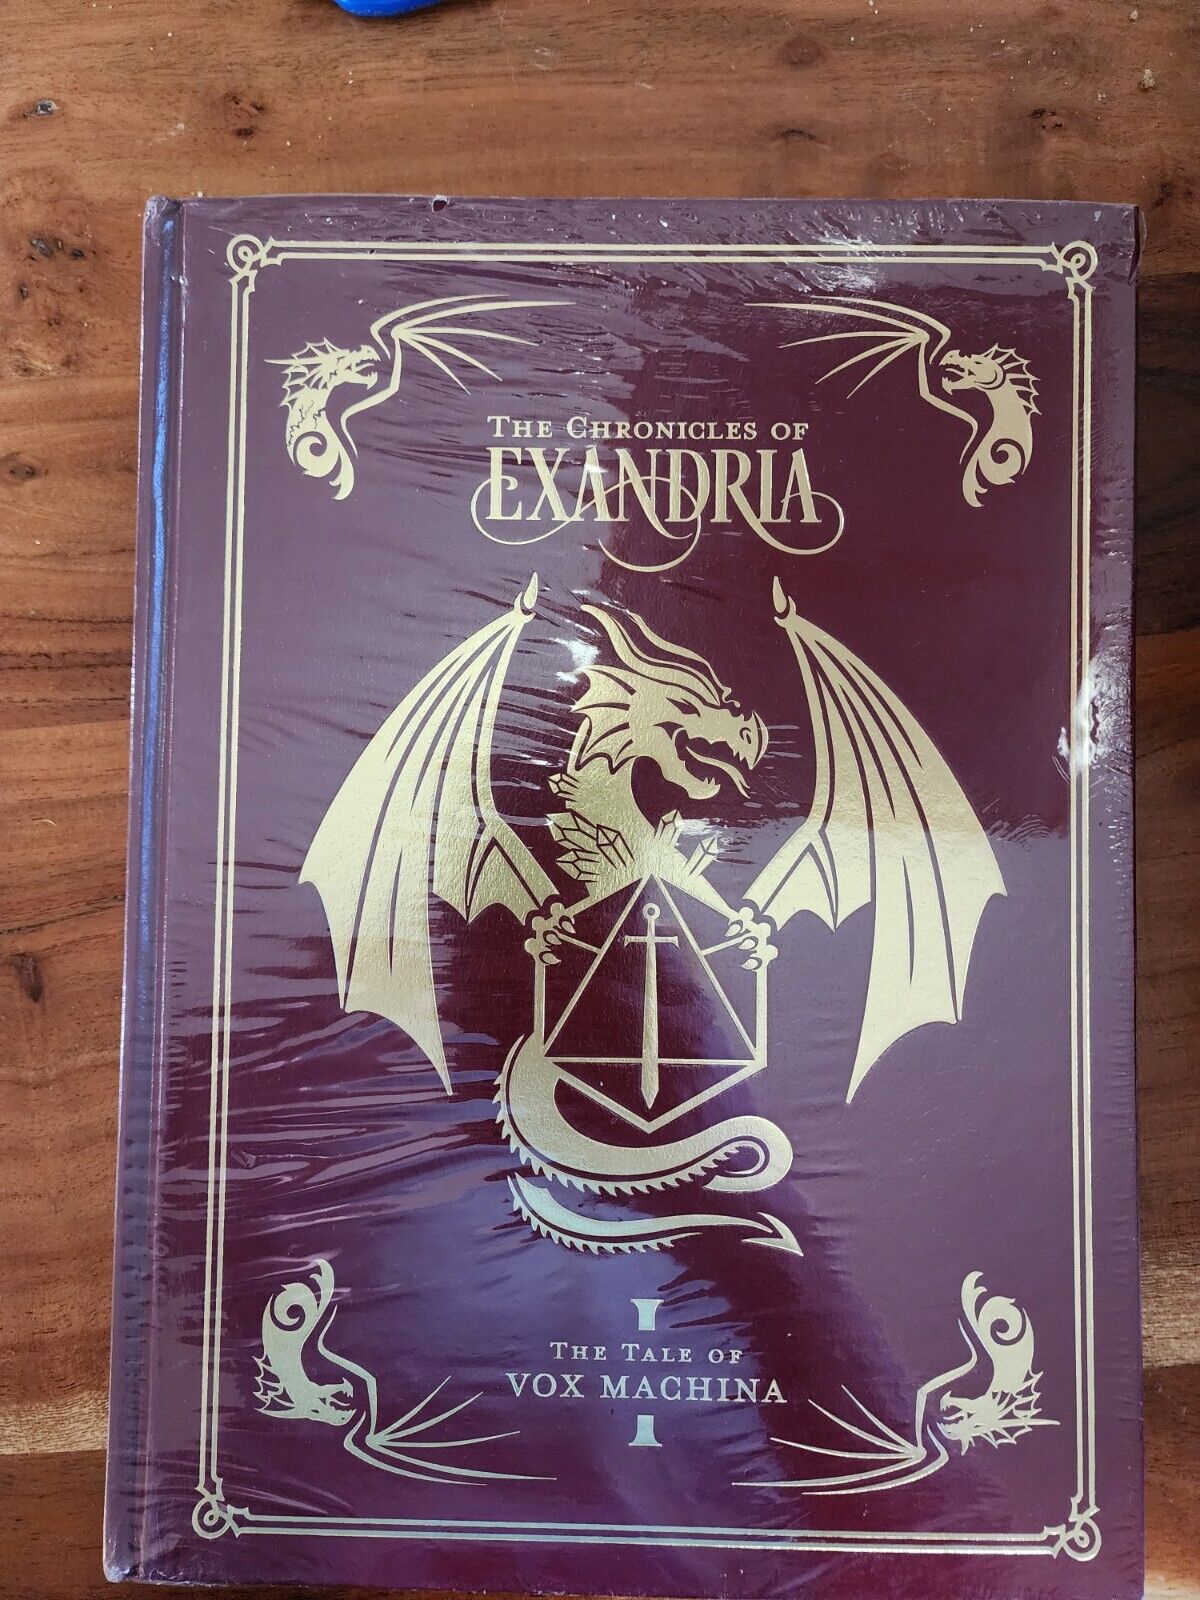 Rare The Chronicles of Exandria Vol. I Deluxe : The Tale of Vox Machina Sealed 